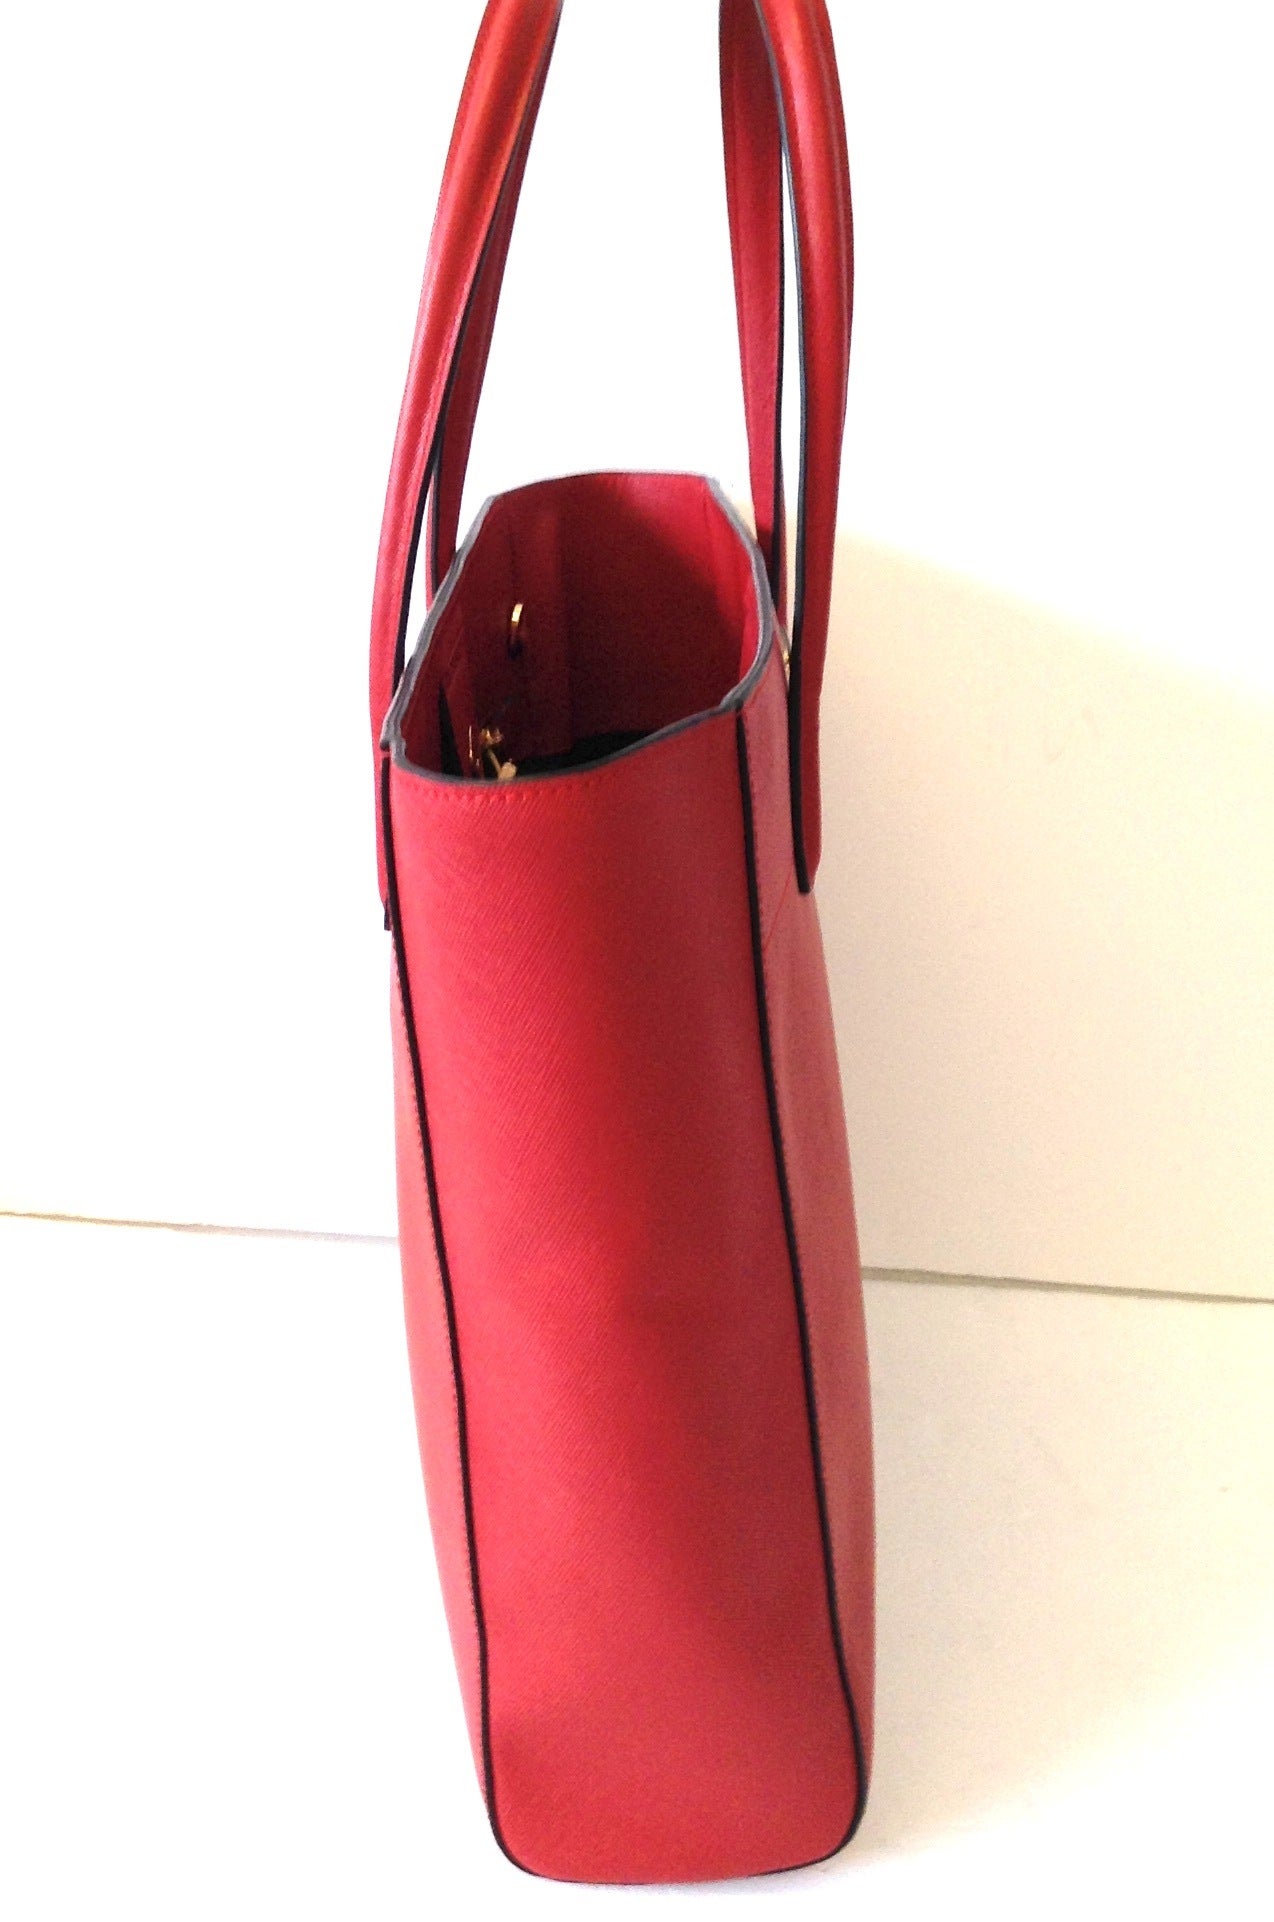 2013 PRADA Saffiano Tote in Red Lipstick 
WITH STRAP - DUST BAG - AUTHENTICATION 
IMMACULATE CONDITION - MINOR MARK 
Clean inside and out
Made in Italy 
HEIGHT 12 INCHES - WIDTH 18 INCHES - DEPTH 5 INCHES 
Hardware in Gold